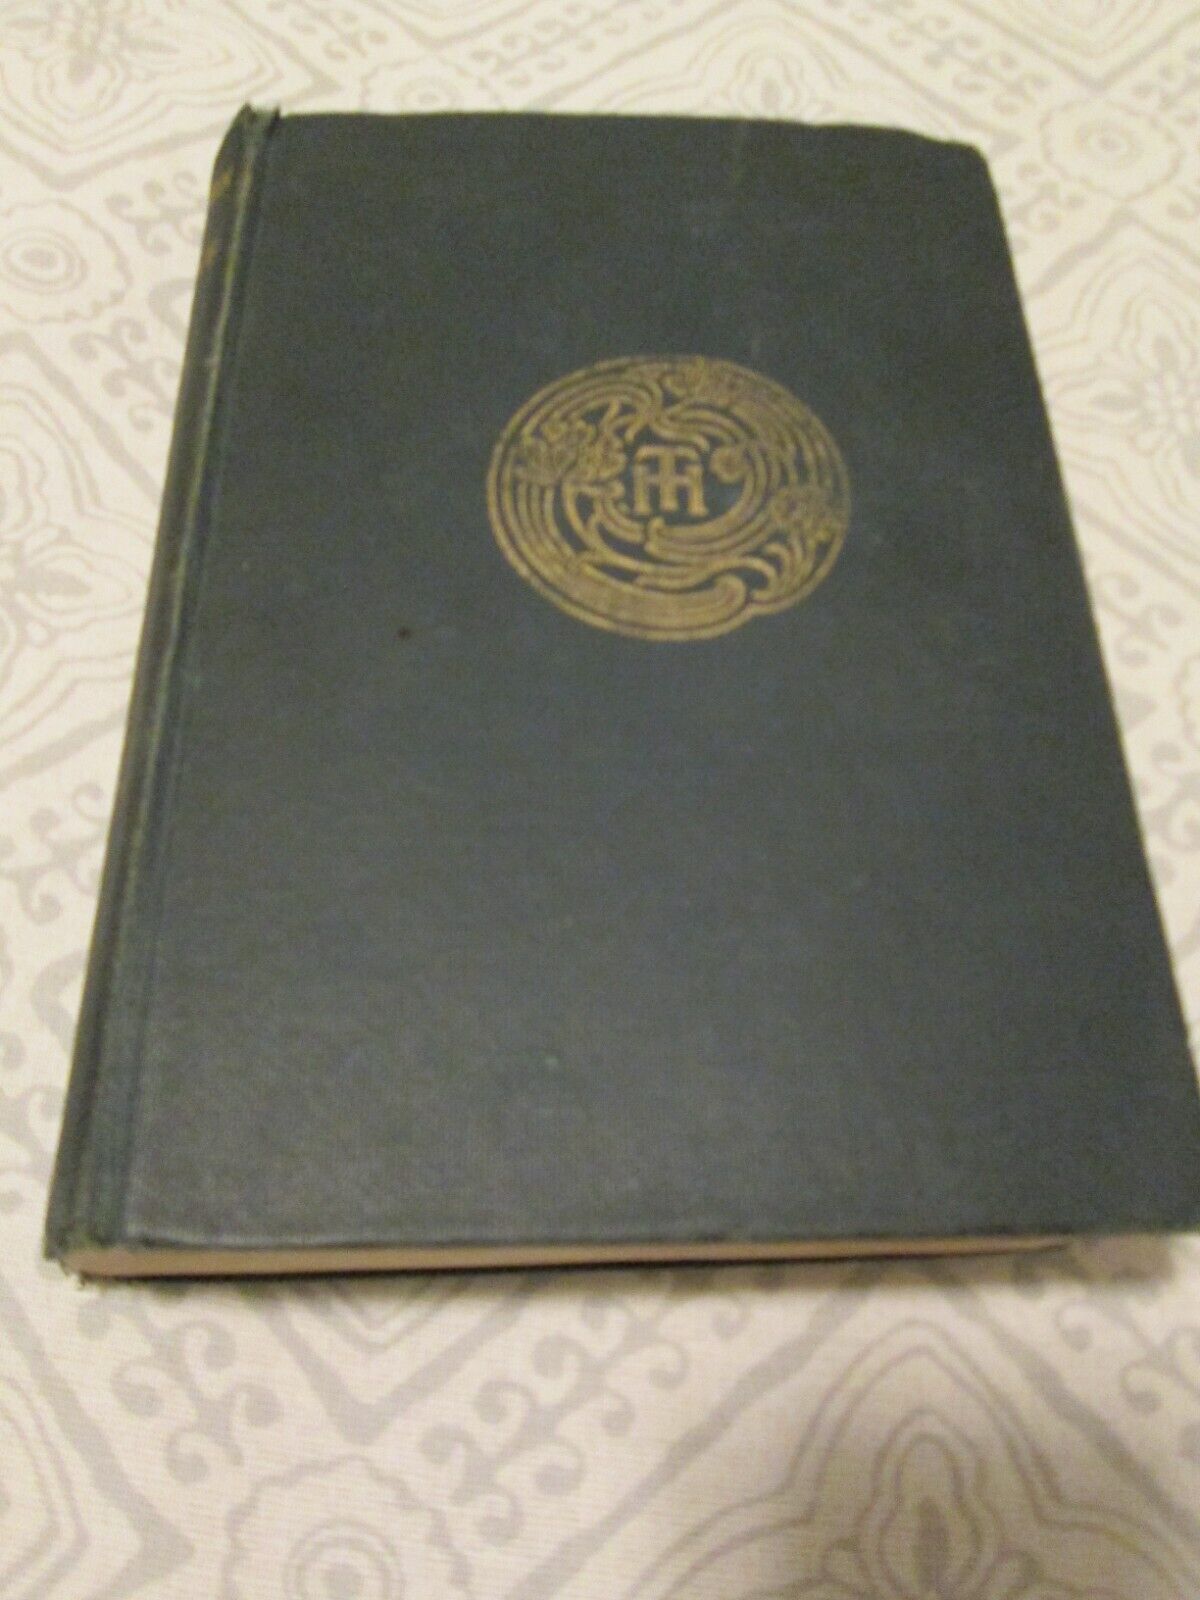 The Return Of The Native Thomas Hardy 1895 Harper Hard cover book